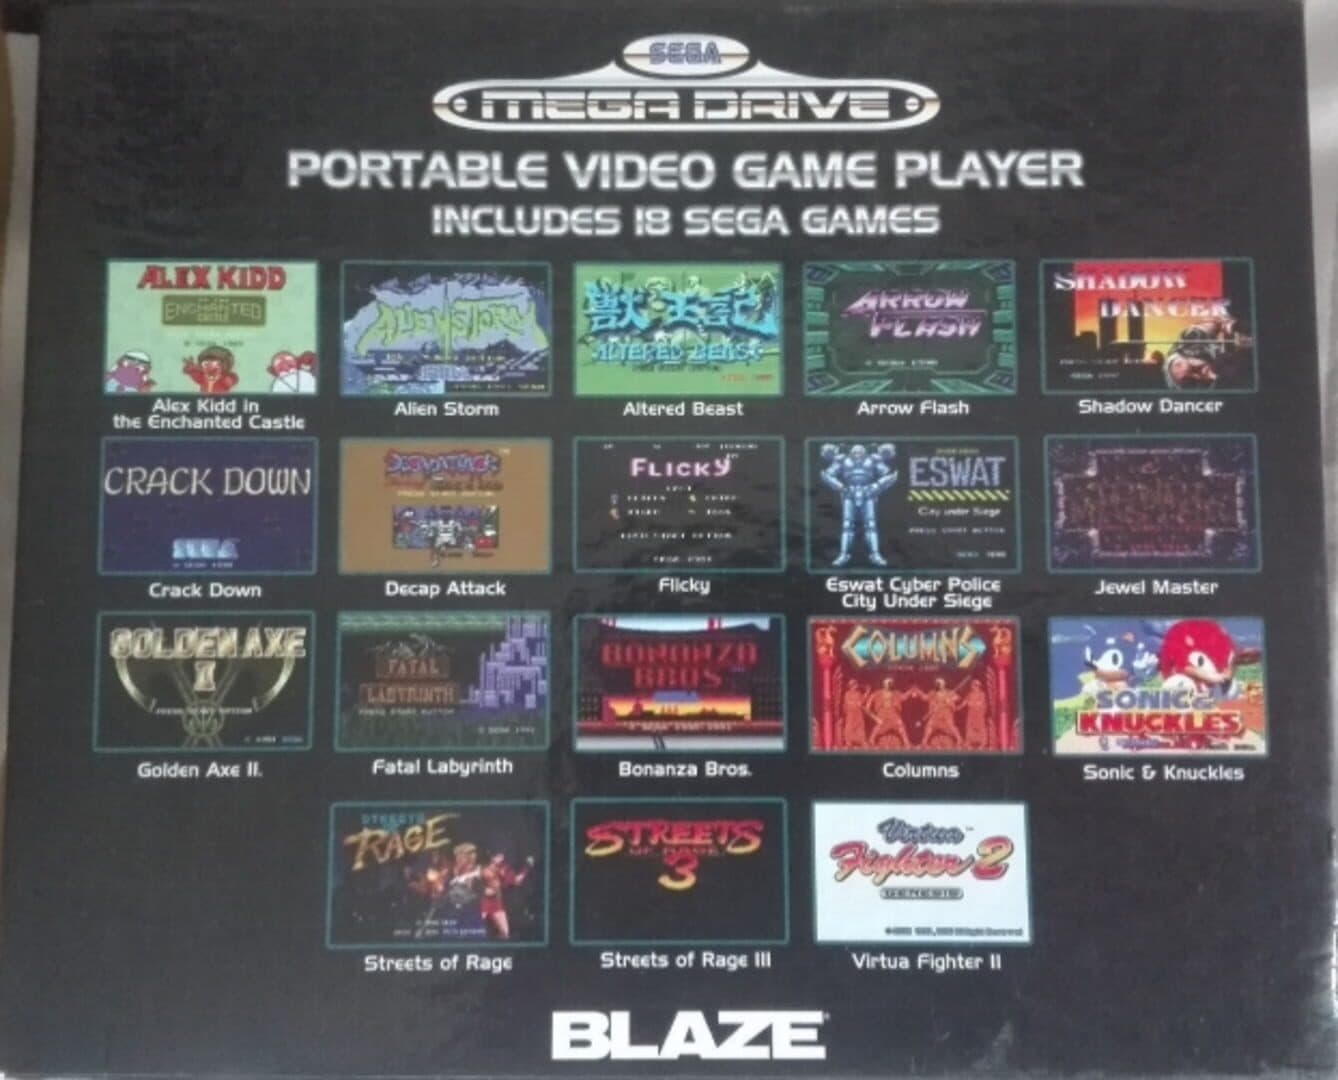 Sega Mega Drive Portable Video Game Player: Streets of Rage Special Edition Image